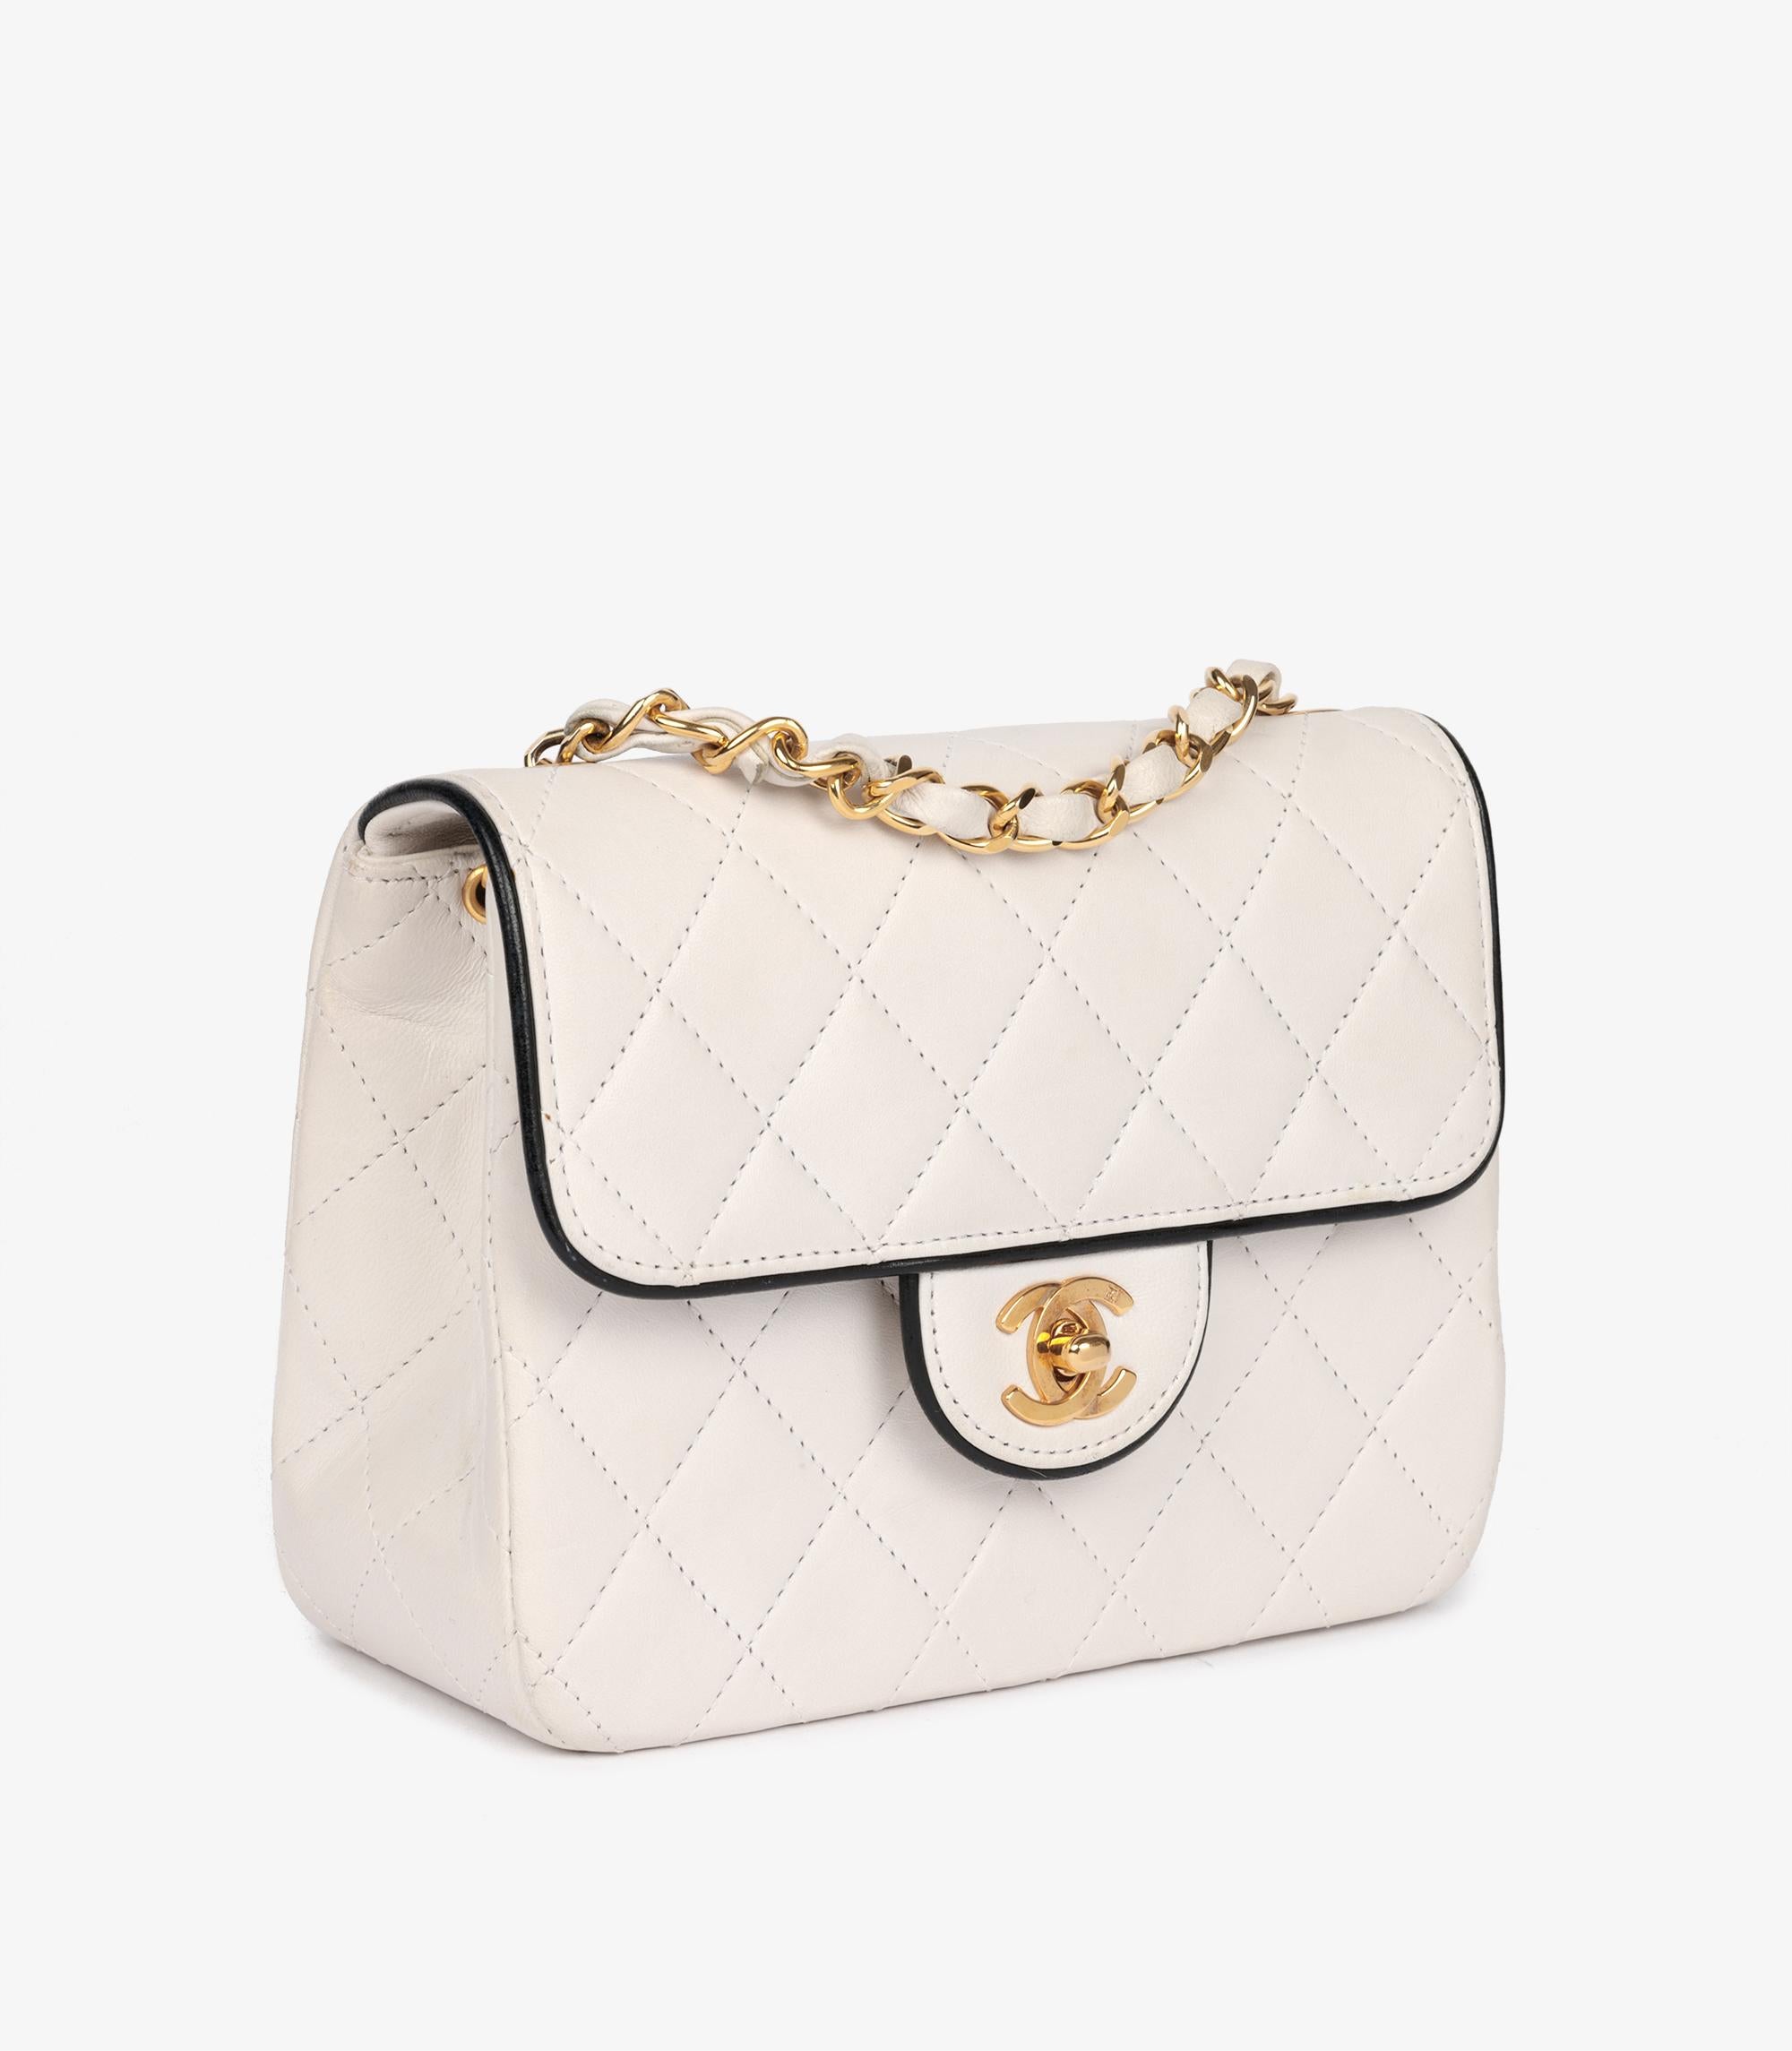 Chanel White Quilted Lambskin With Black Lambskin Leather Trim Vintage Square Mini Flap Bag

Brand- Chanel
Model- Square Mini Flap Bag
Product Type- Crossbody, Shoulder
Serial Number- 1588554
Age- Circa 1989
Accompanied By- Chanel Dust Bag,